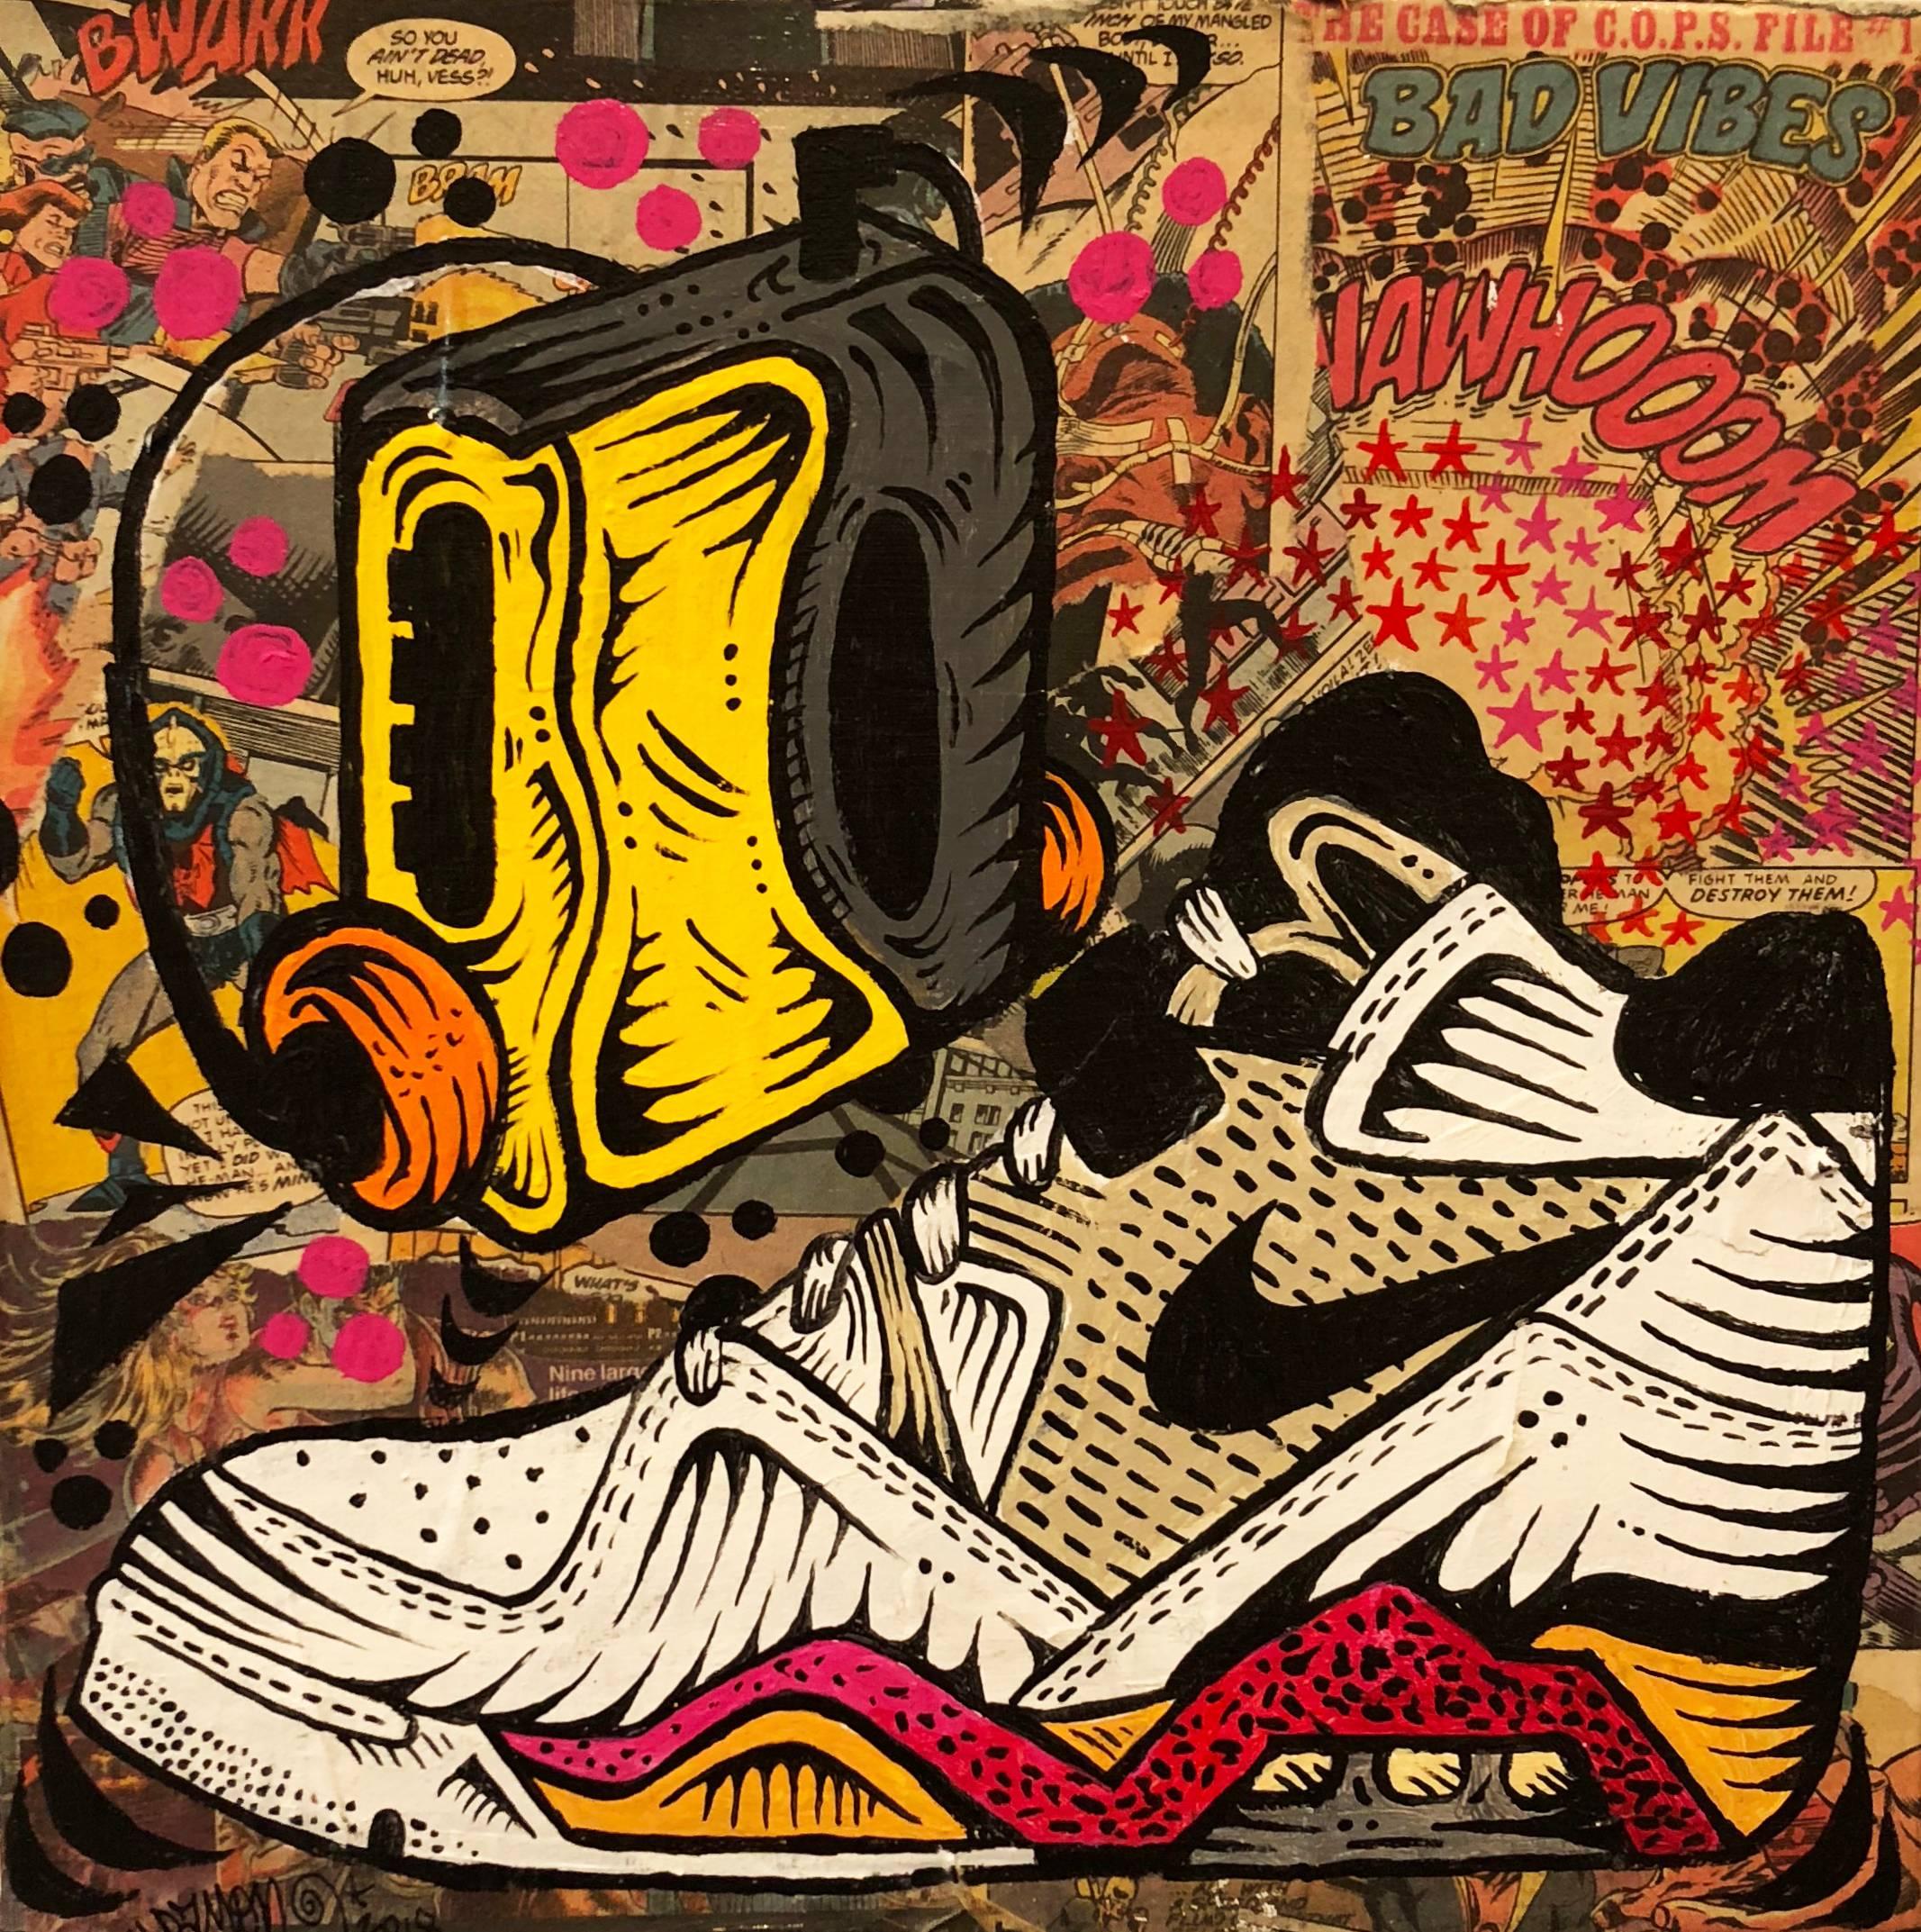 Cassette Player - Painting by Damon Johnson